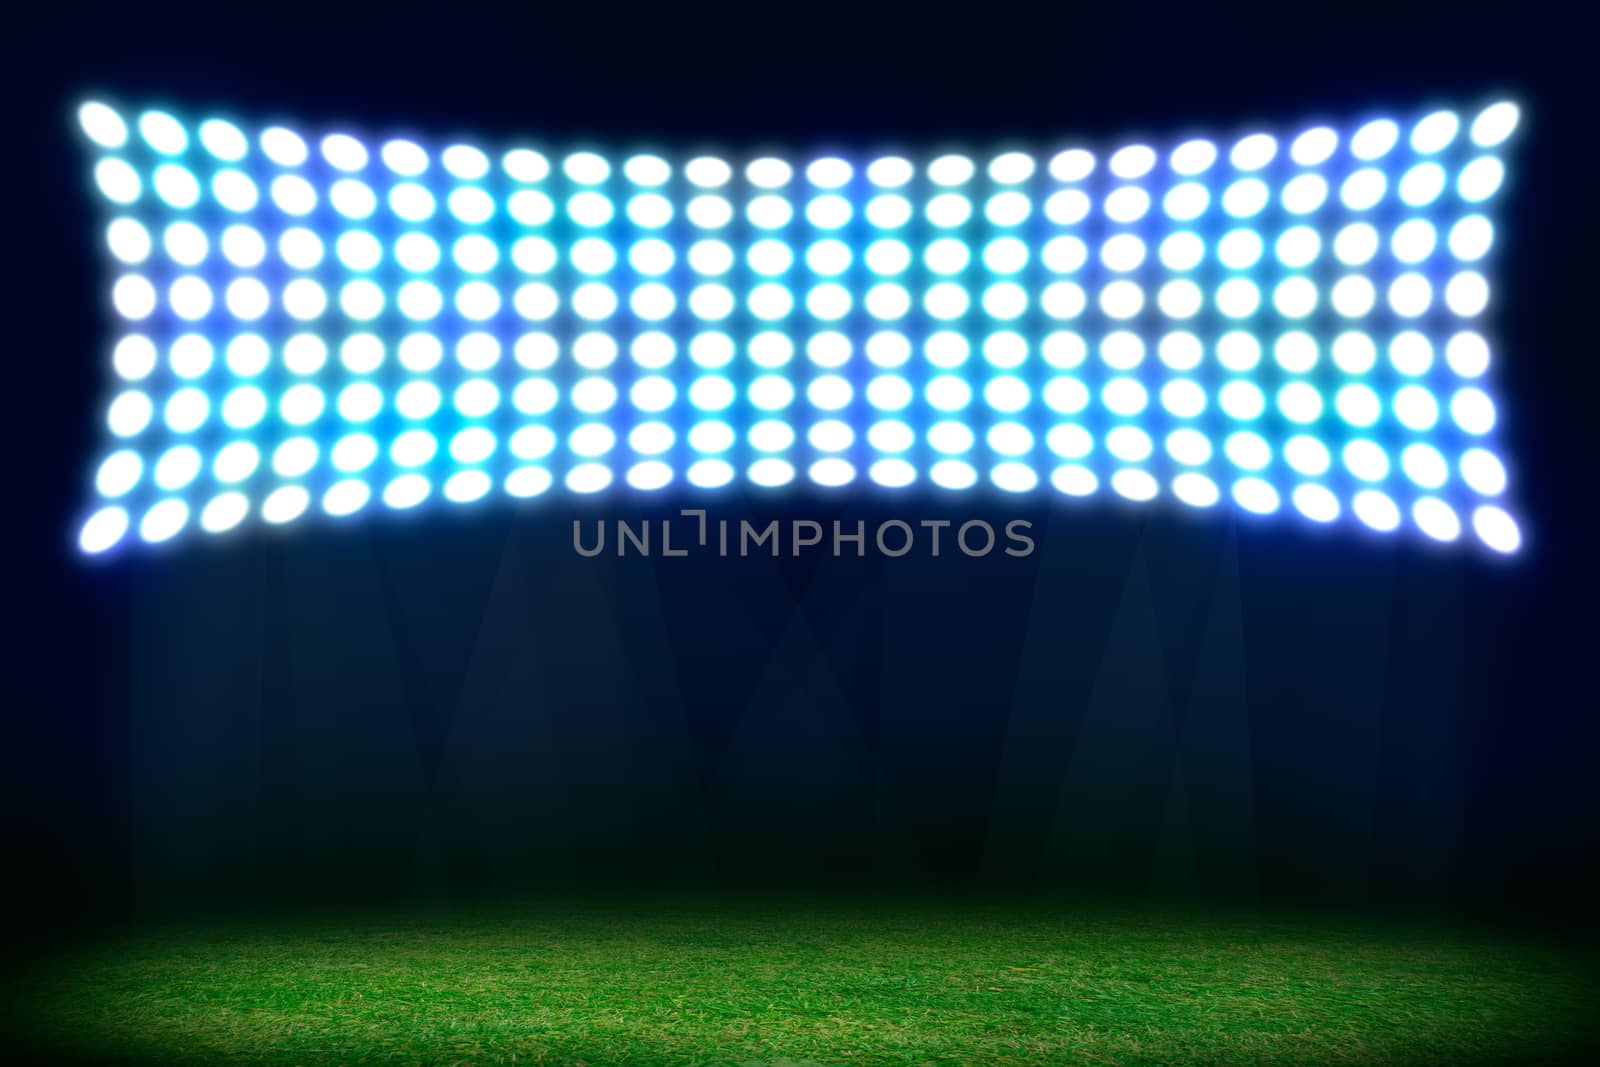 On stadium. Abstract football or soccer background. Copy space for your text or product 